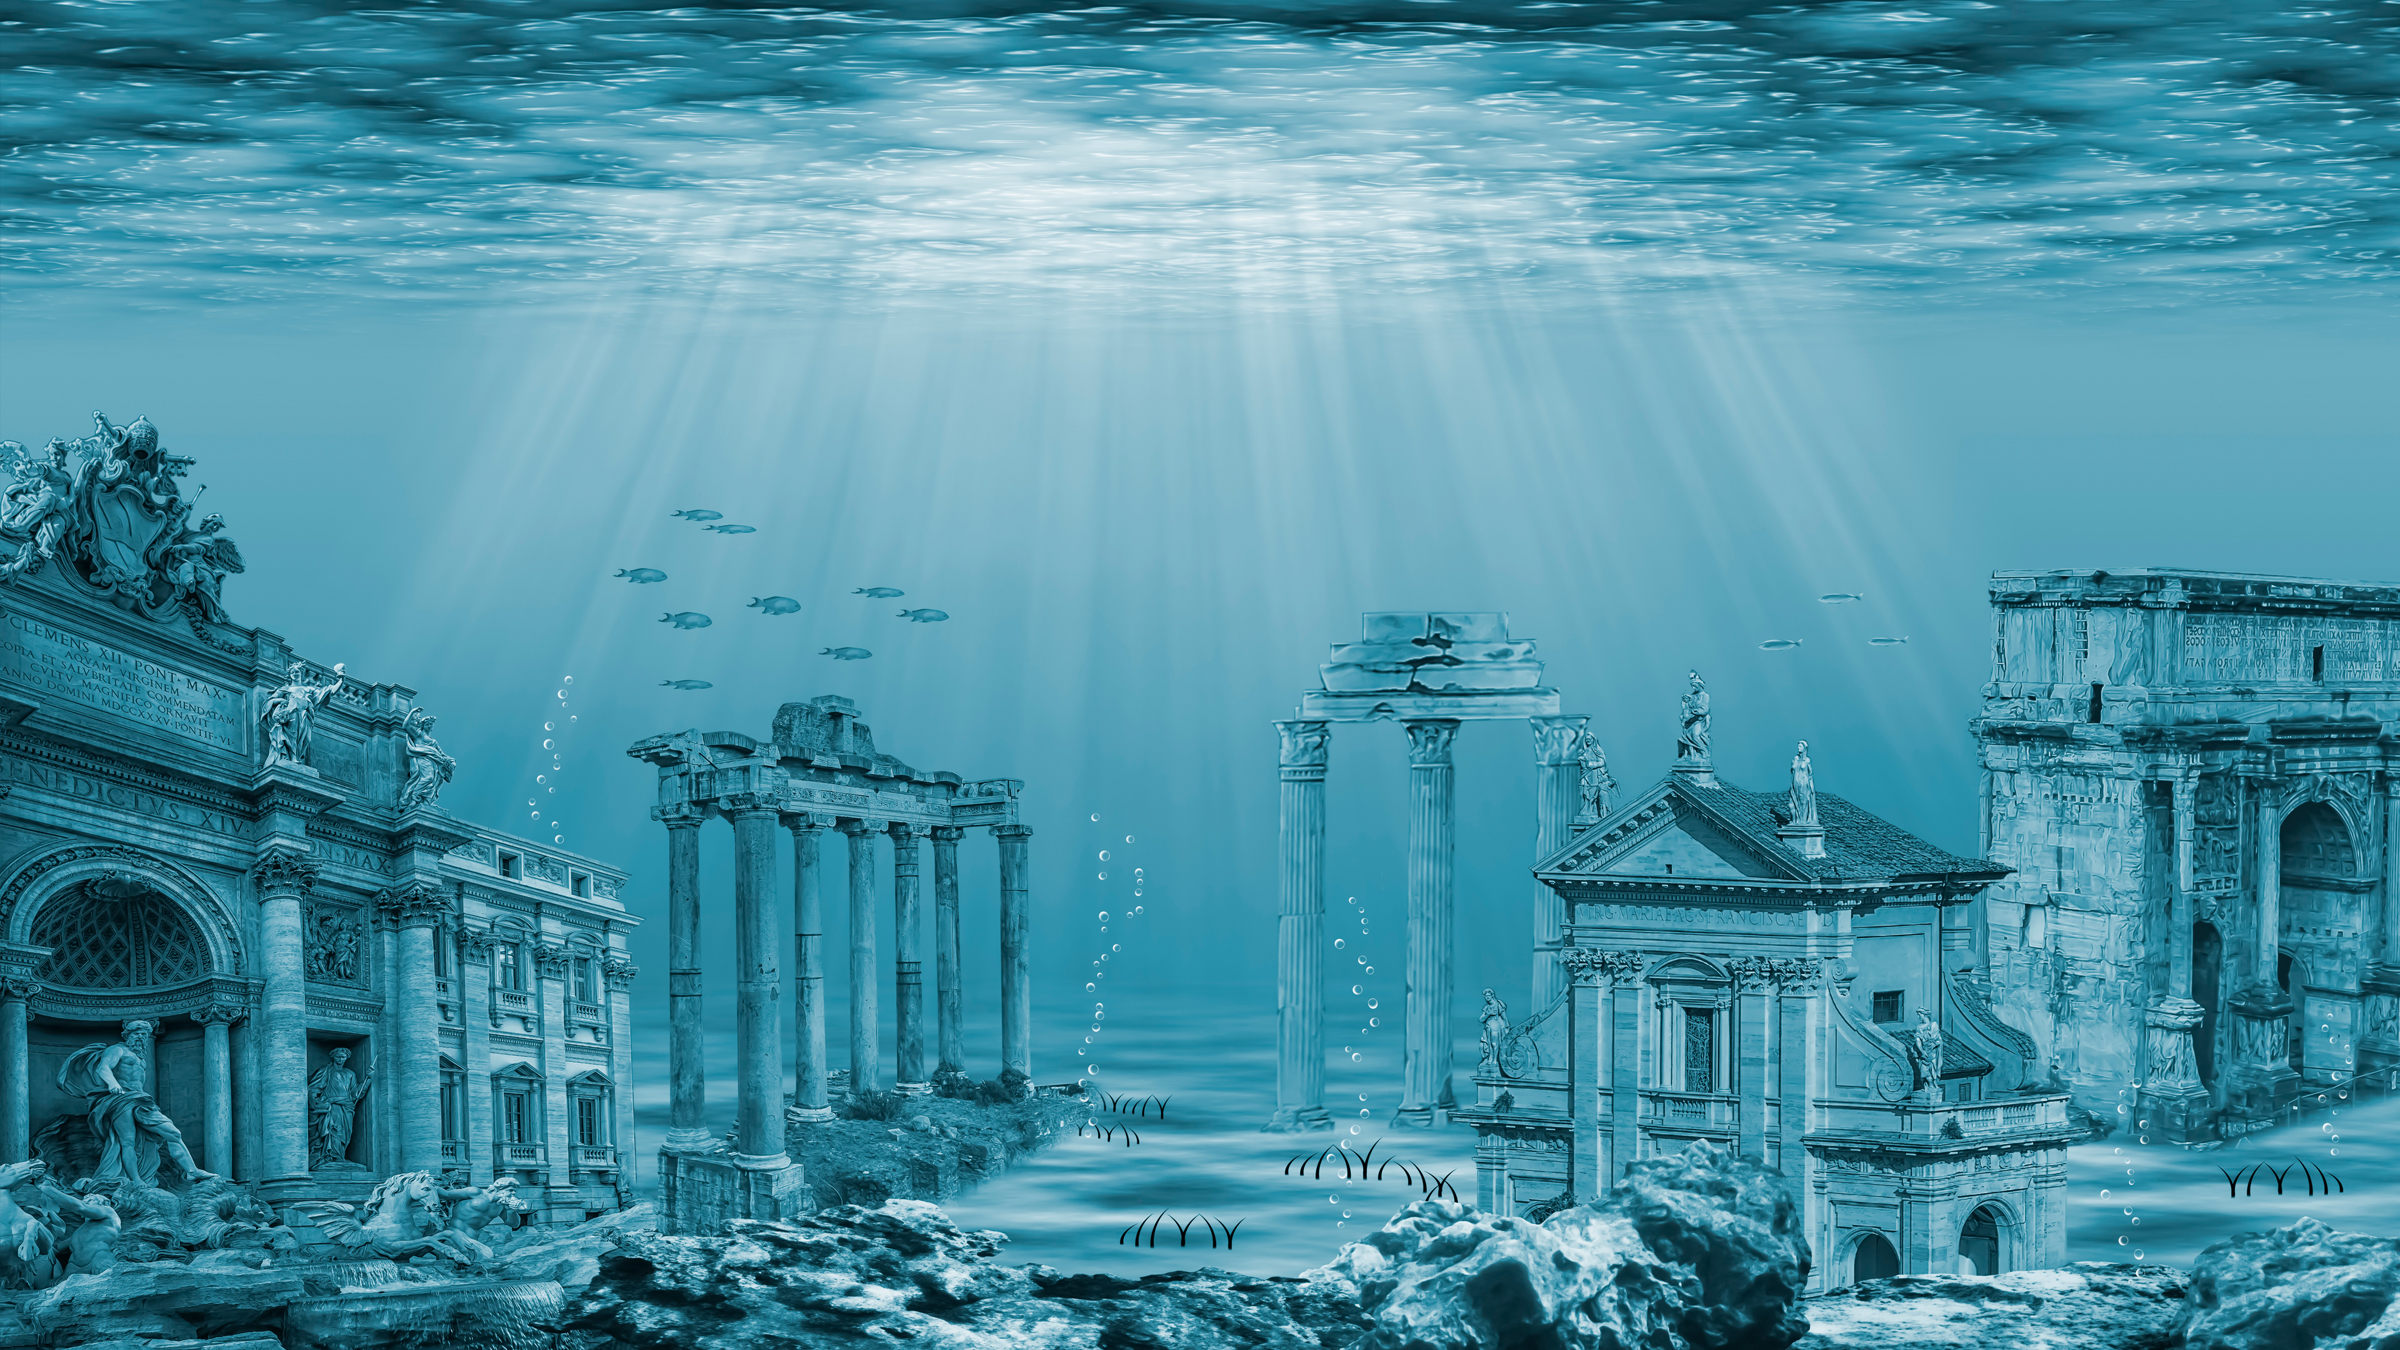 Here we see an illustration of the ruins of the city of Atlantis underwater.